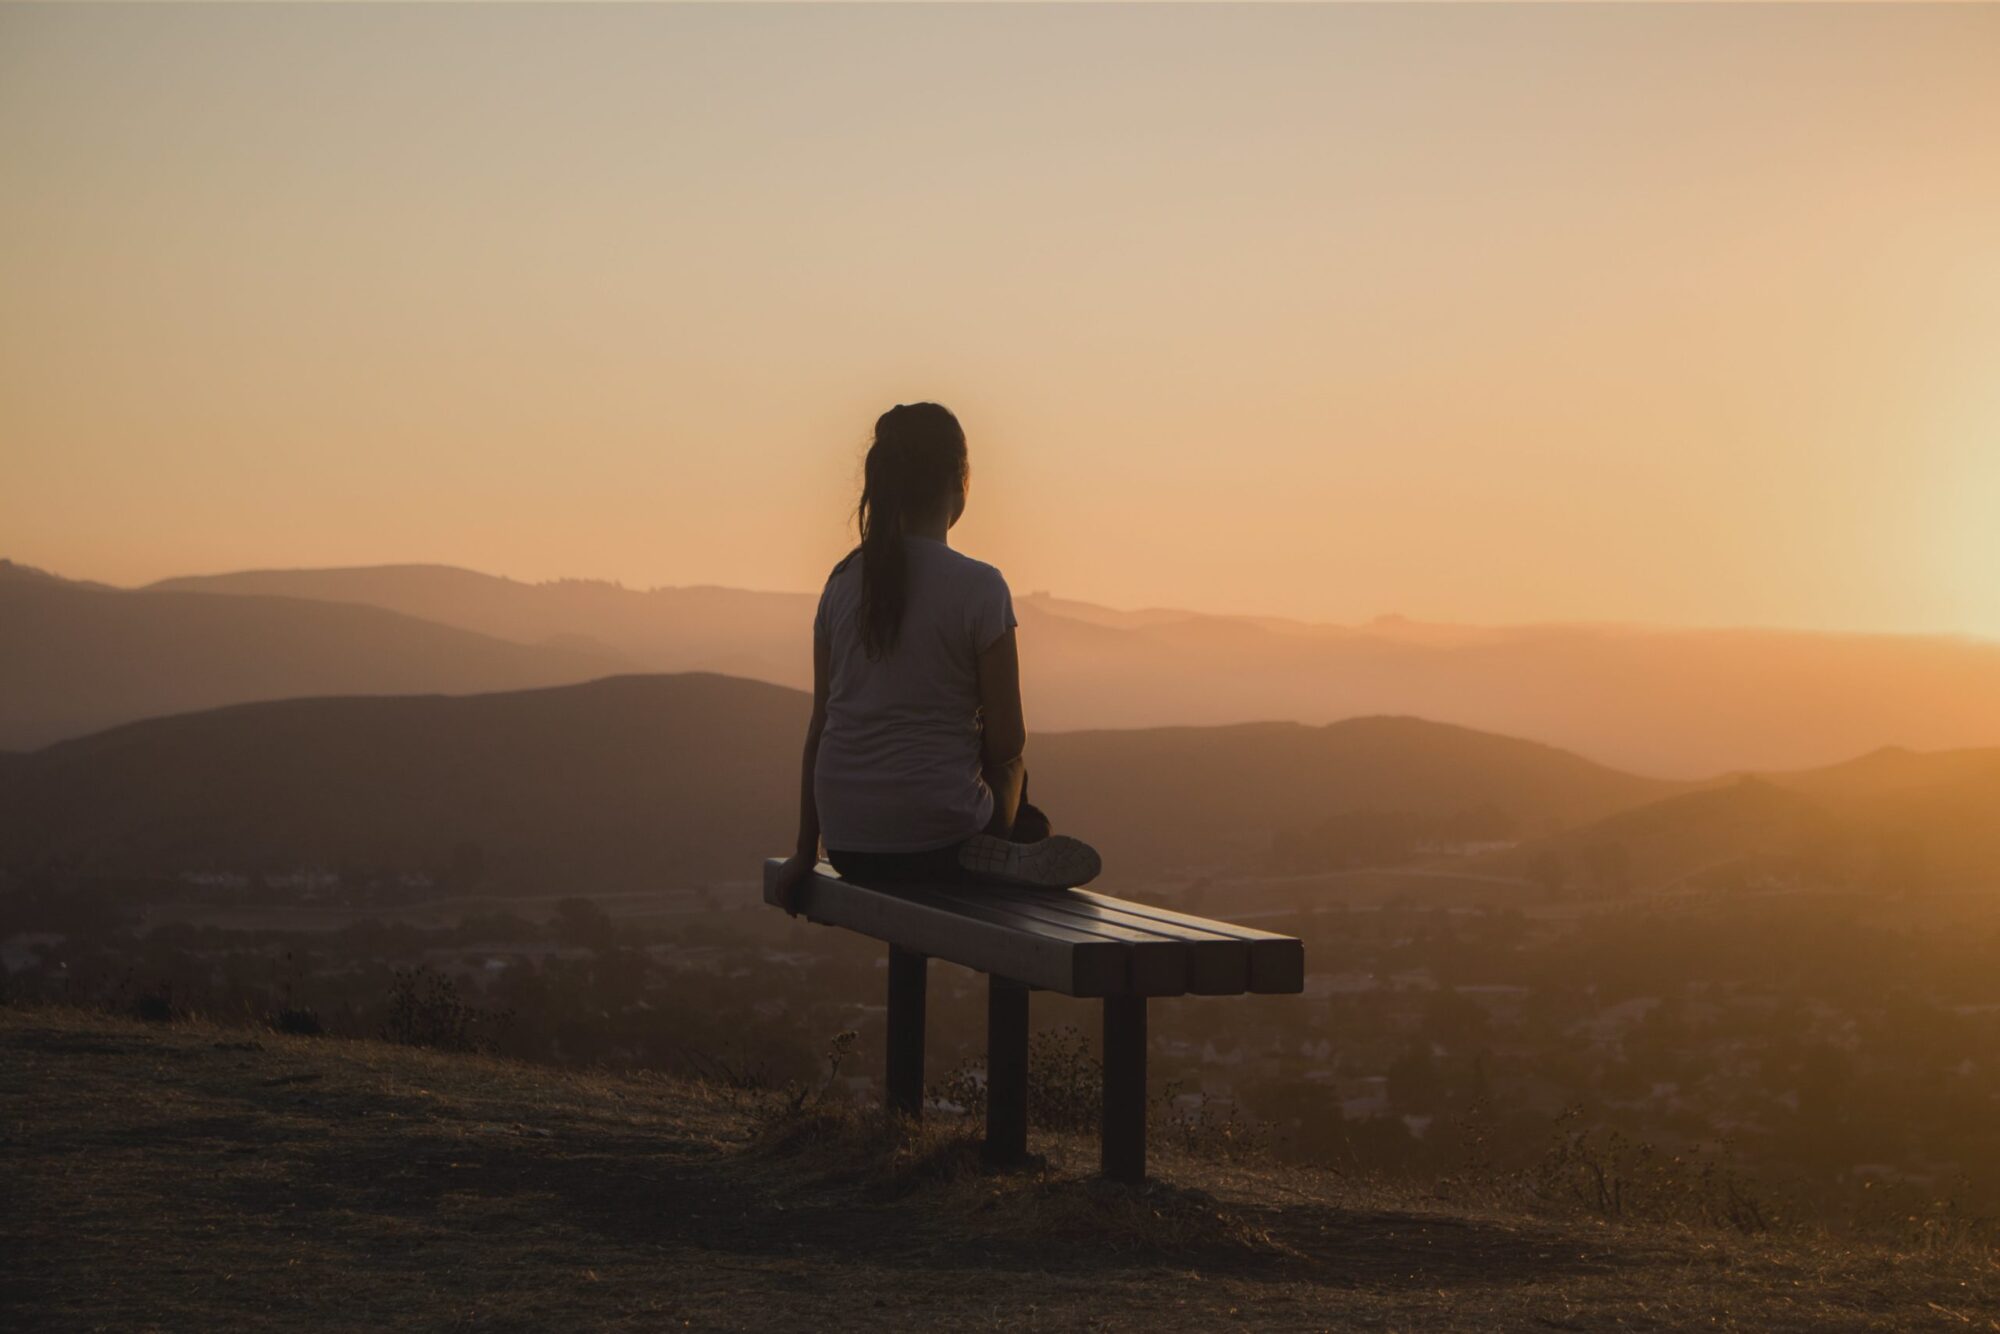 Silhouette of woman on a bench on a hill at sunset